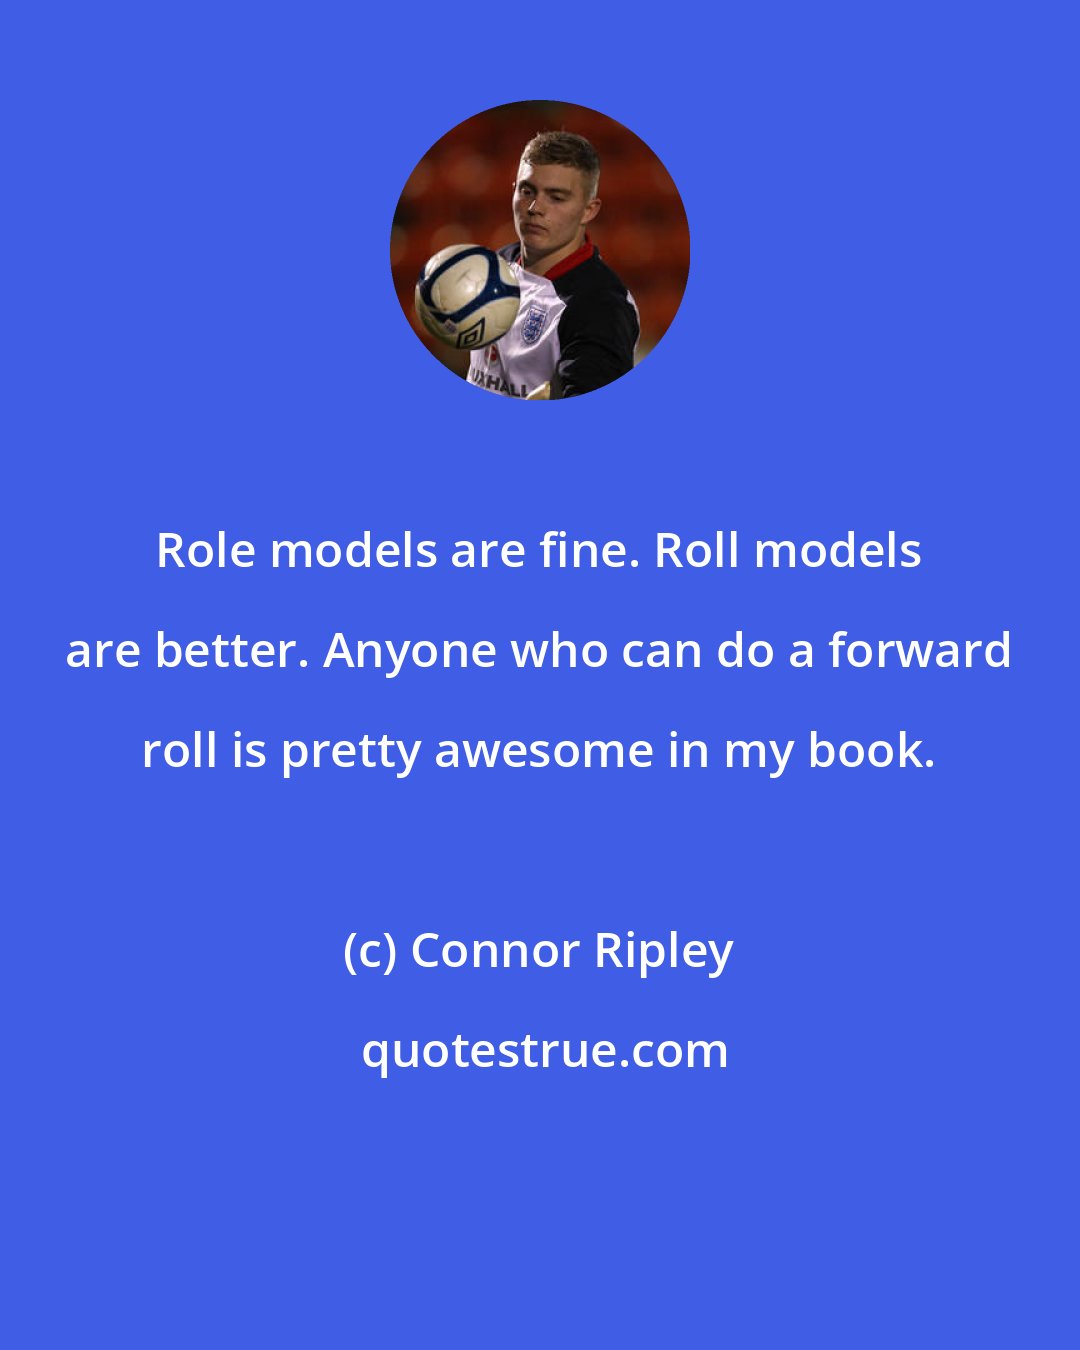 Connor Ripley: Role models are fine. Roll models are better. Anyone who can do a forward roll is pretty awesome in my book.